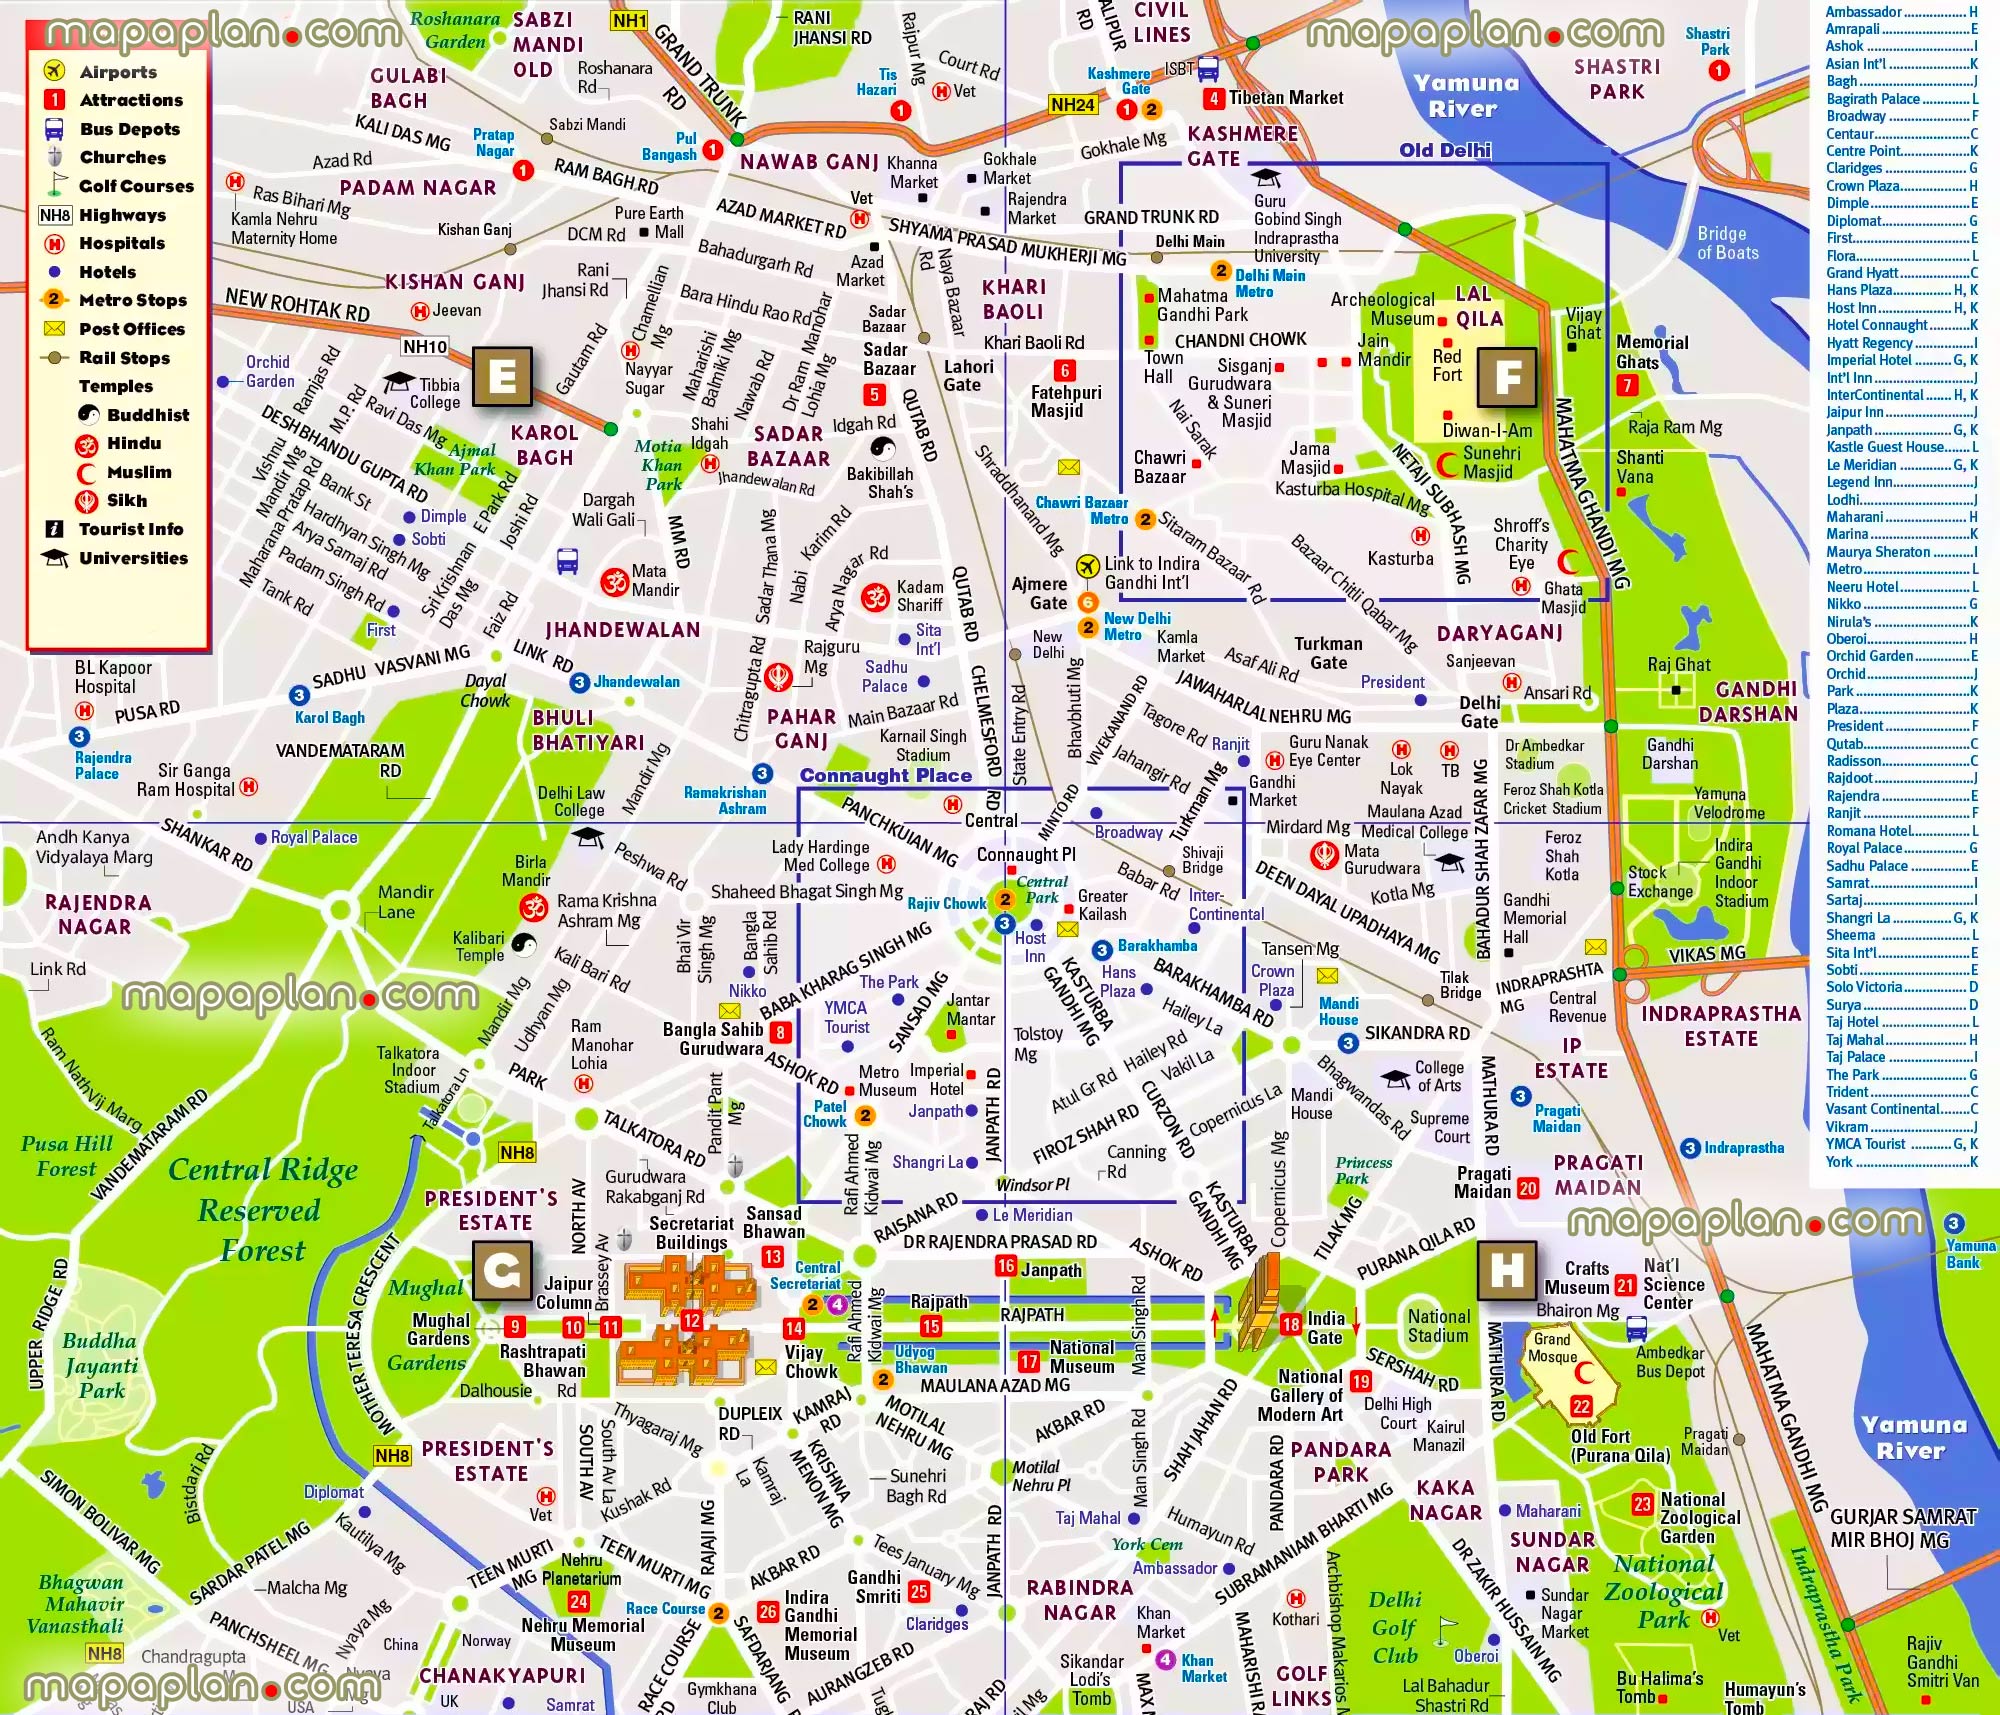 central delhi city center pop up free download print 1 day trip travel guide locations major attractions great historic spots best must see sights detailed view orientation navigation directionss Delhi Top tourist attractions map